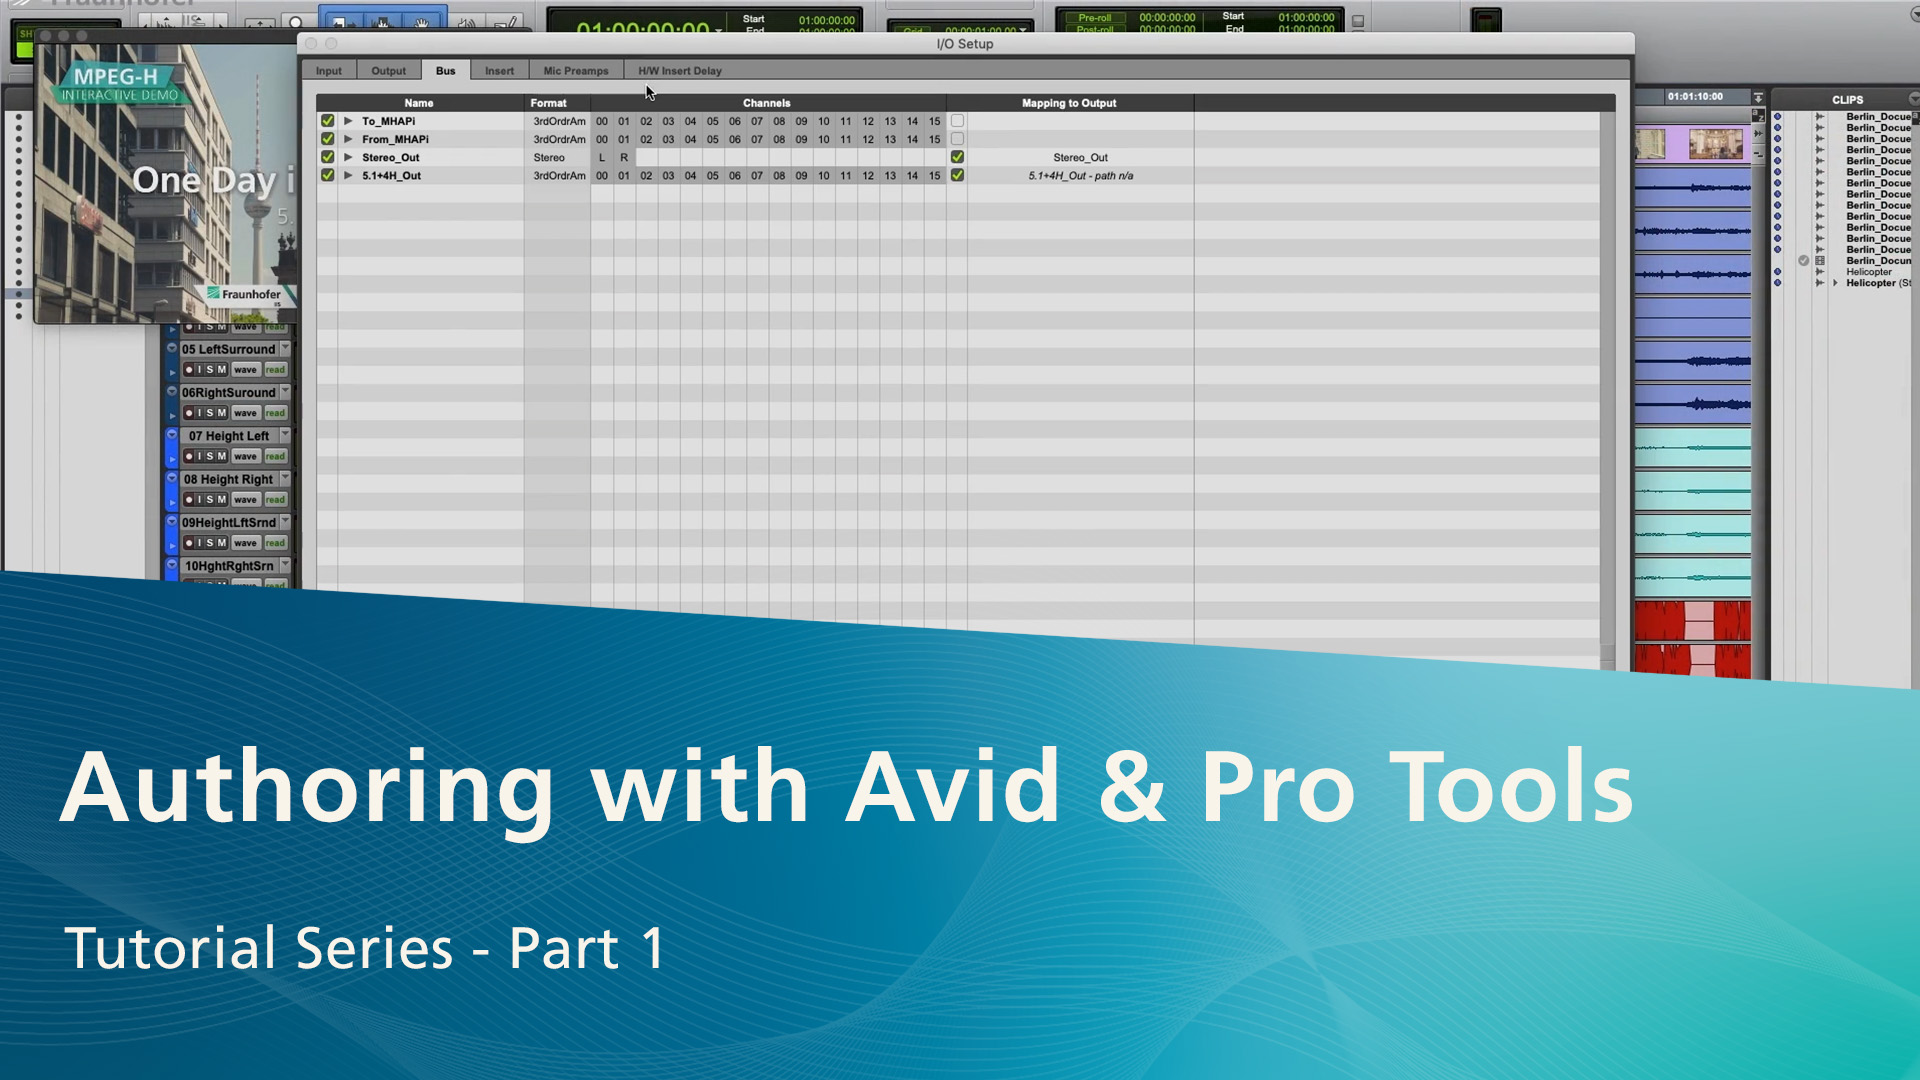 Video MPEG-H Audio Authoring Suite Tutorial Serie 1: Authoring with Avid and Pro Tools